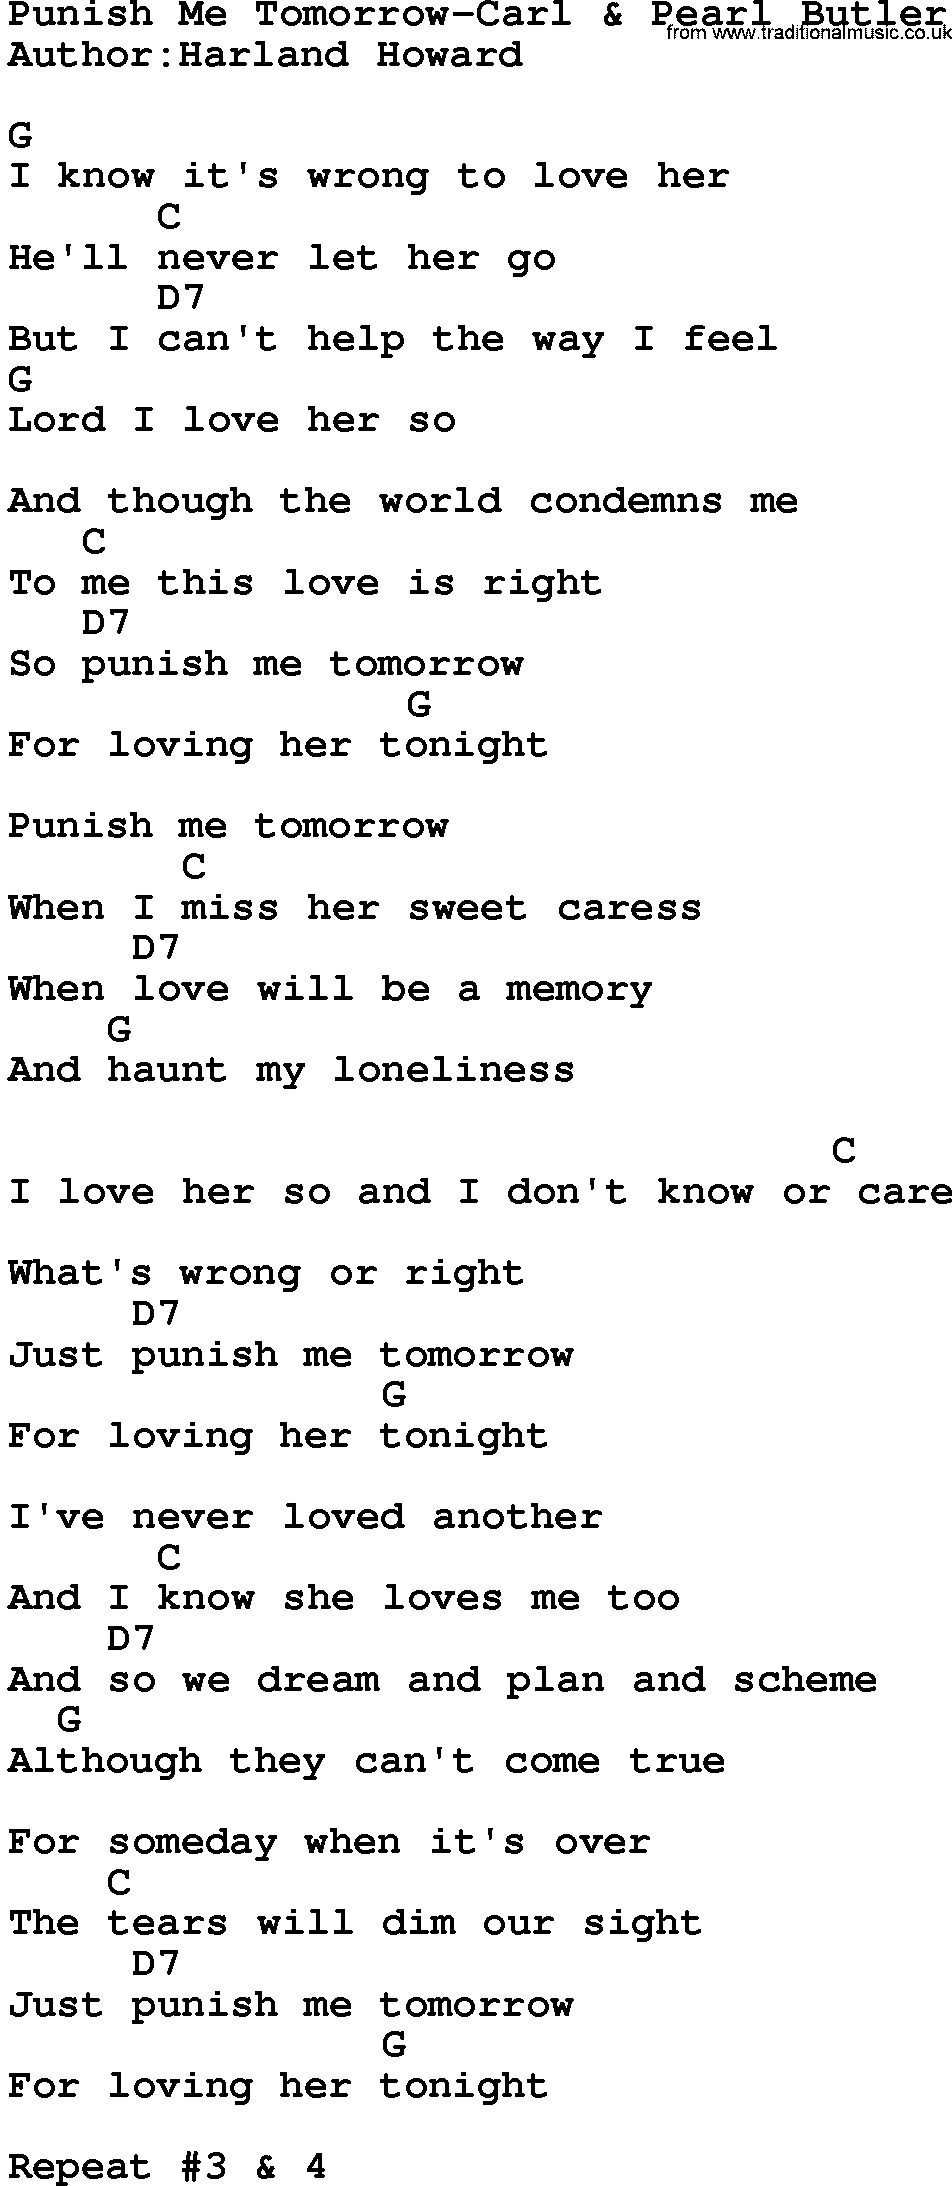 Country music song: Punish Me Tomorrow-Carl & Pearl Butler lyrics and chords